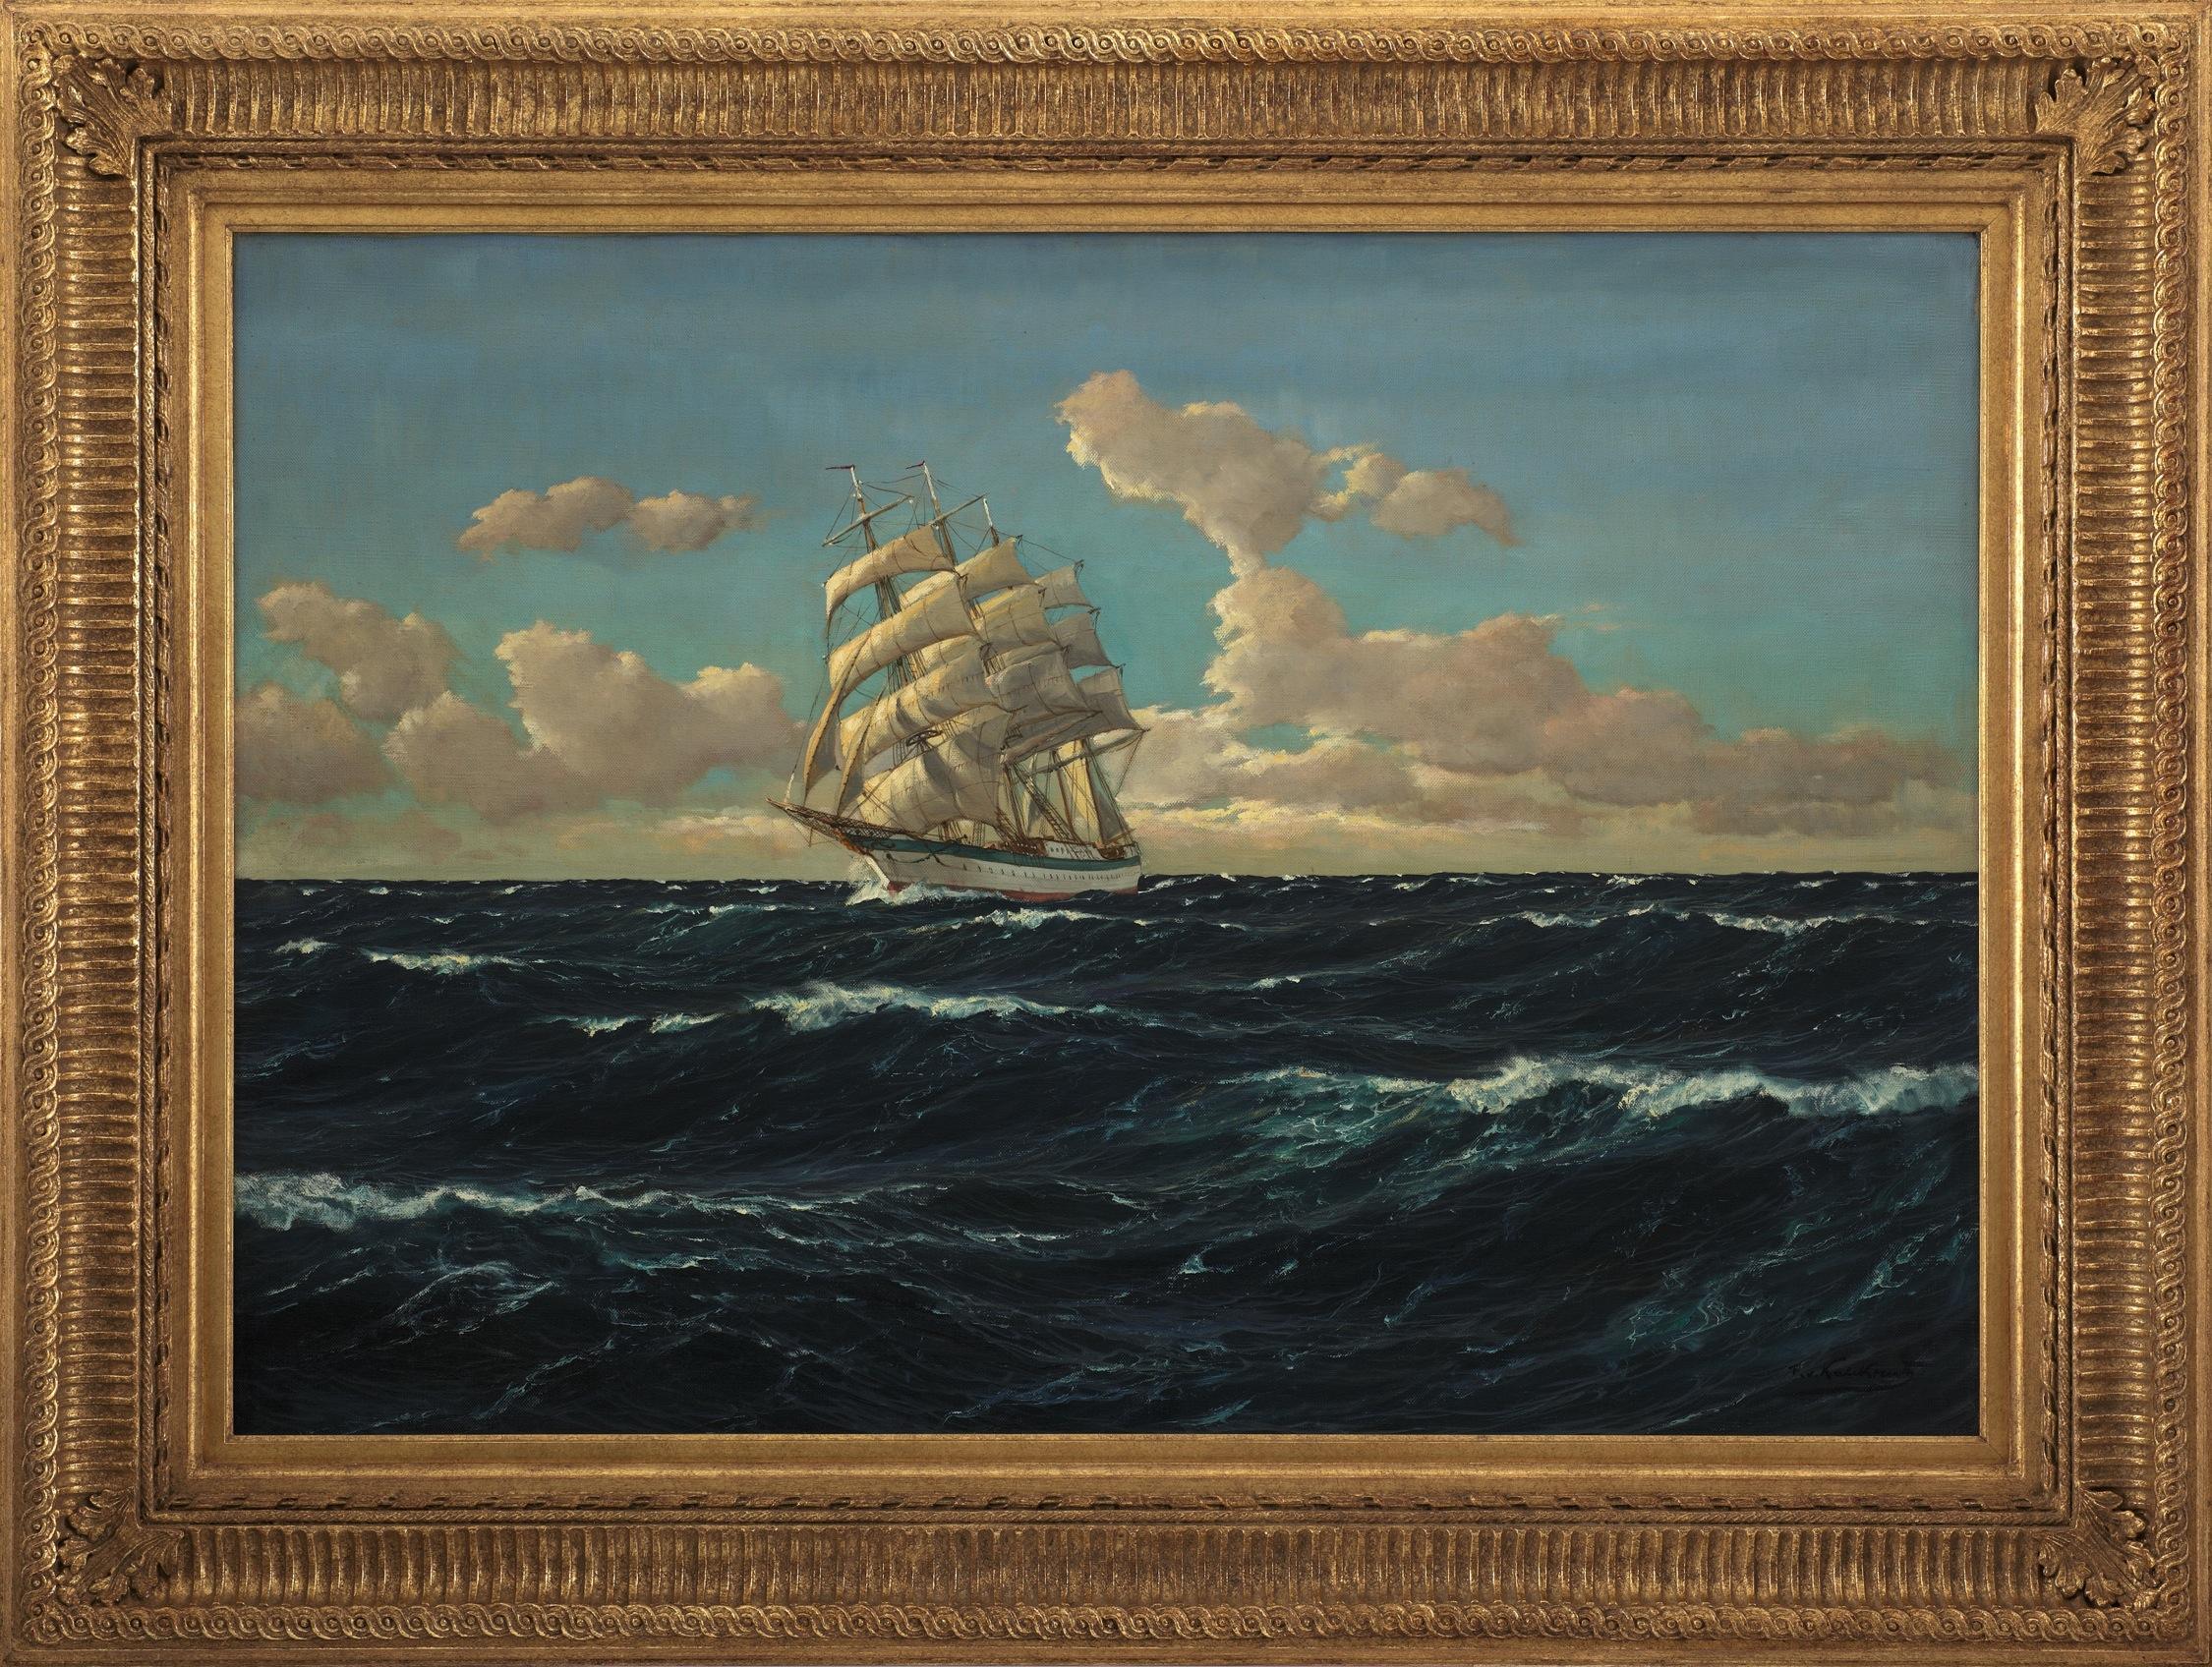 Patrick von Kalckreuth, 1898-1970, 'Full Sail’ Oil on Canvas, Signed In Good Condition For Sale In Bradford on Avon, GB